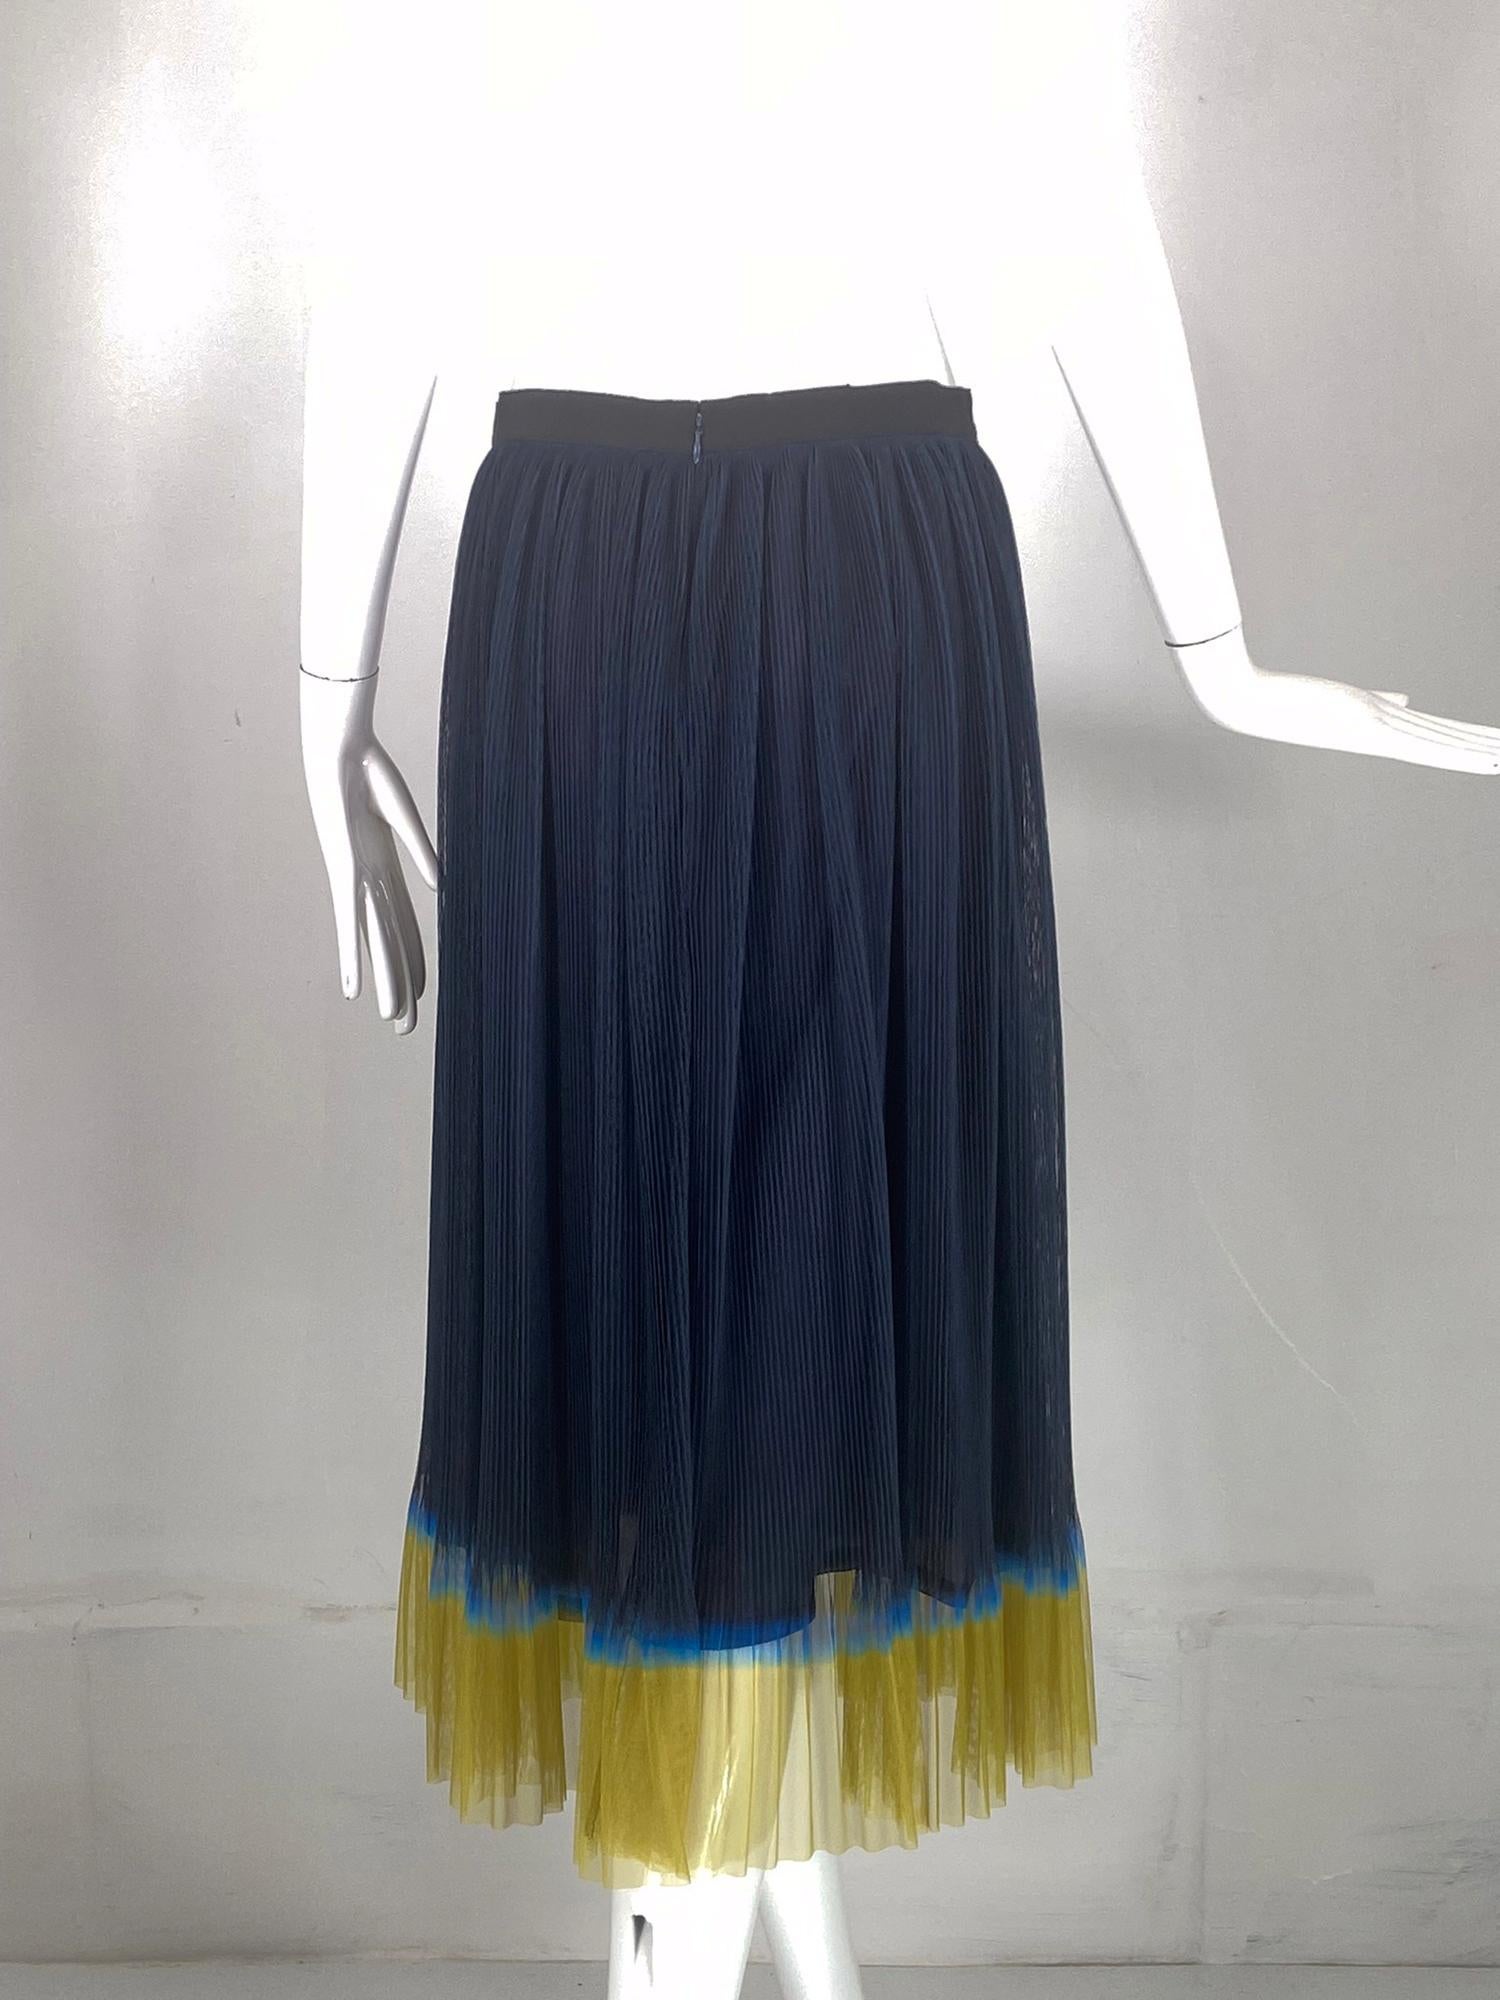 Dries Van Noten Navy Pinch Pleated Ombre Hem Mesh Skirt 38 In Good Condition For Sale In West Palm Beach, FL